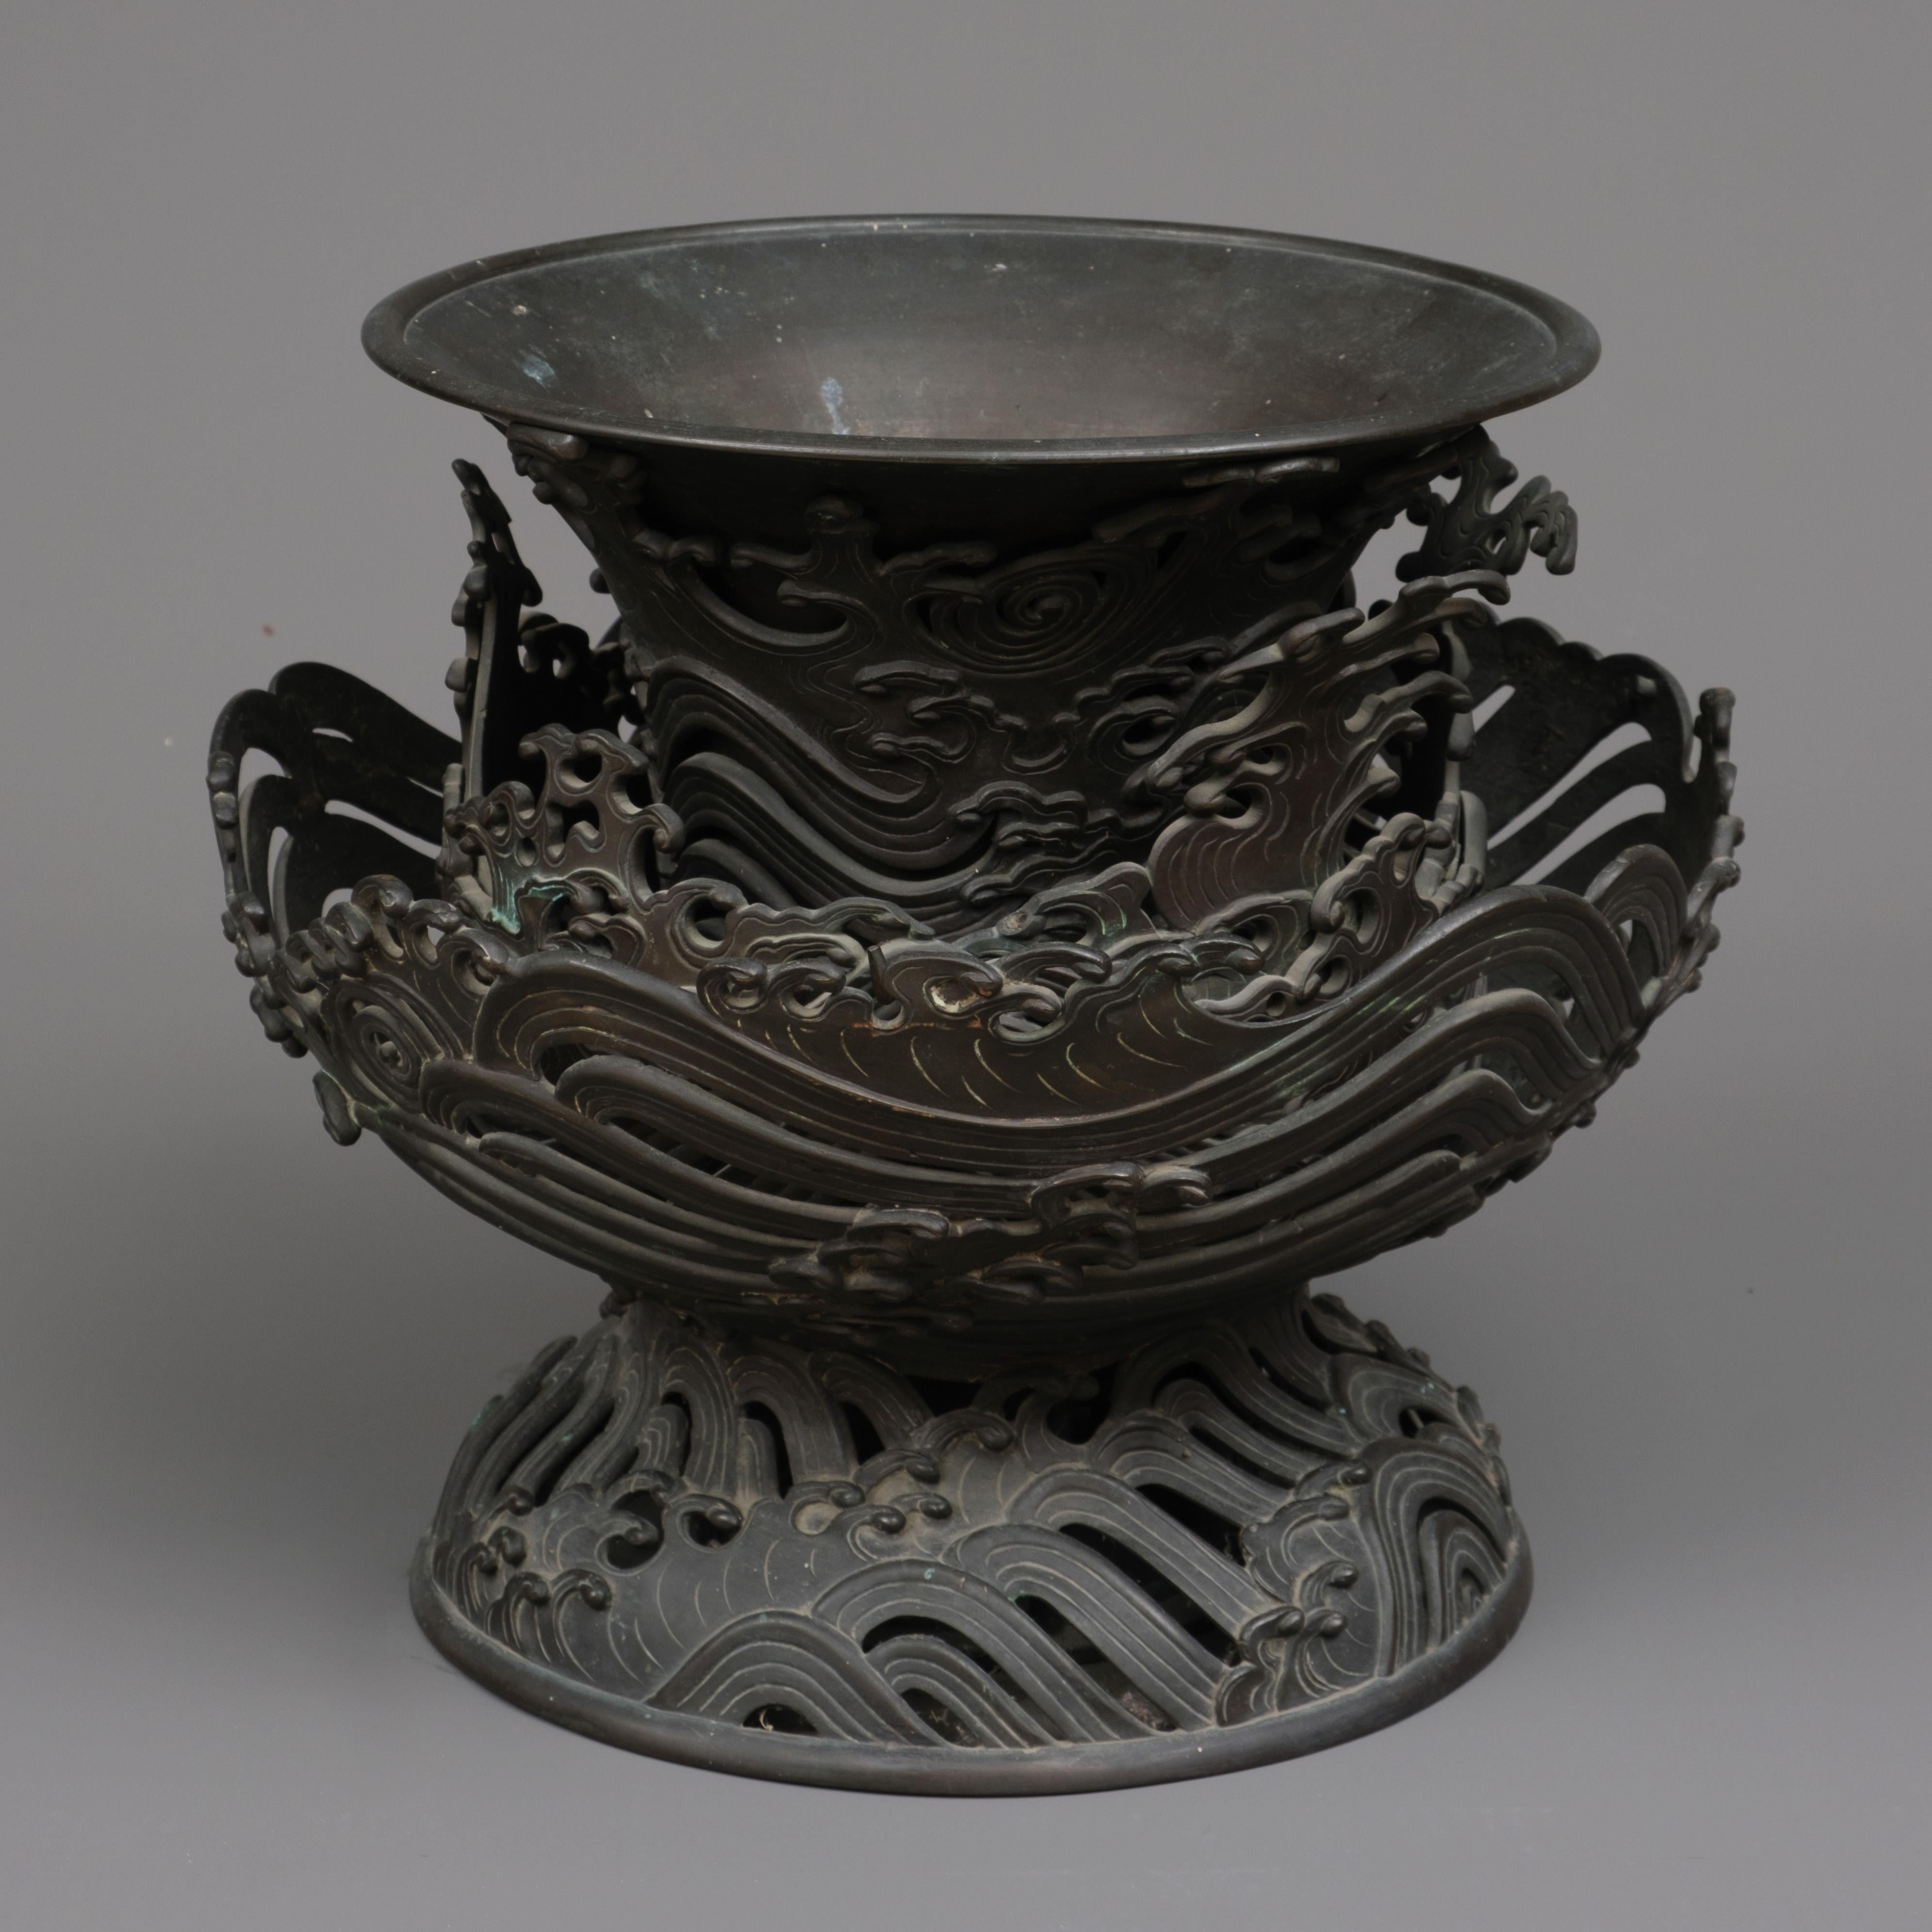 Remarkable and very large bronze 4-tiered trumpet vase intricately designed with a motif of tumultuous waves.
It’s crafted to give the impression that the trumpet-shaped chalice, is engulfed by outward expanding layers of waves rising upwards from